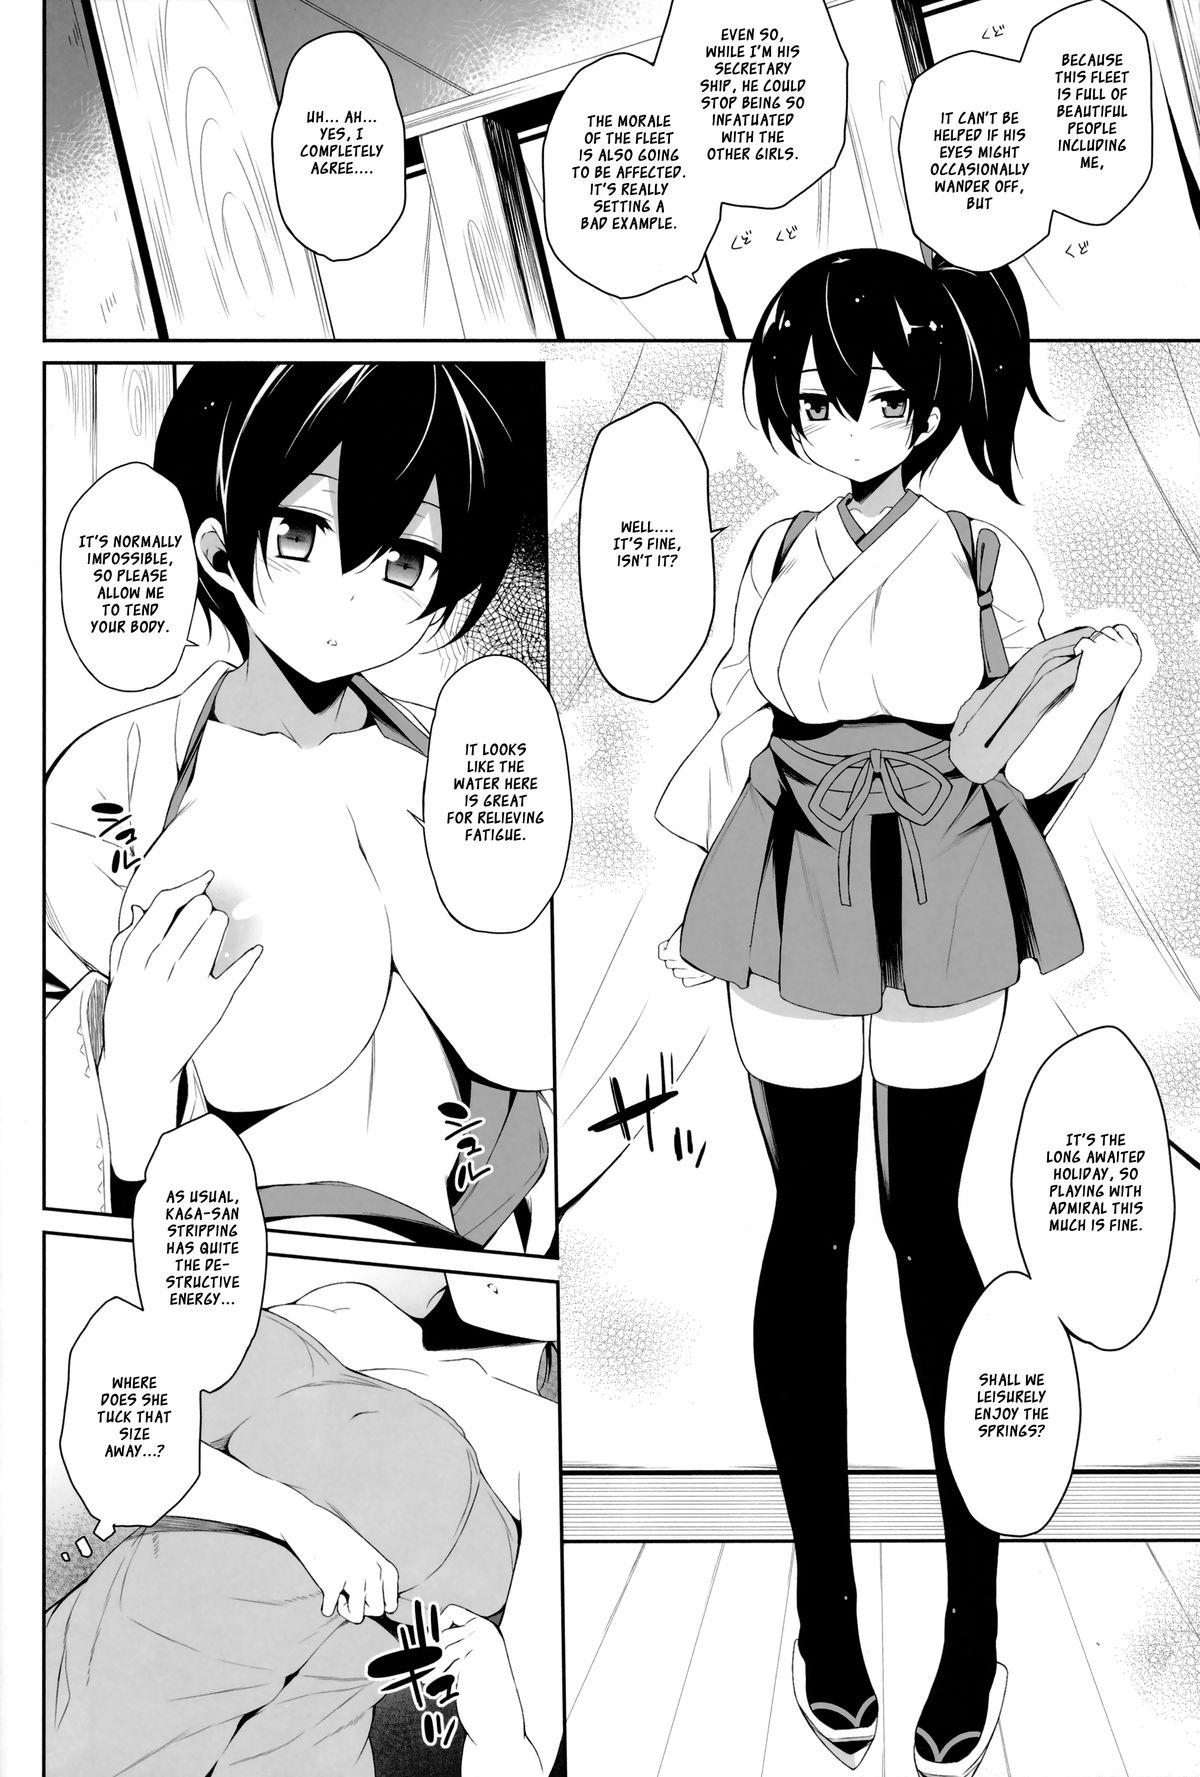 Friends Platonic syndrome - Kantai collection Brasil - Page 5